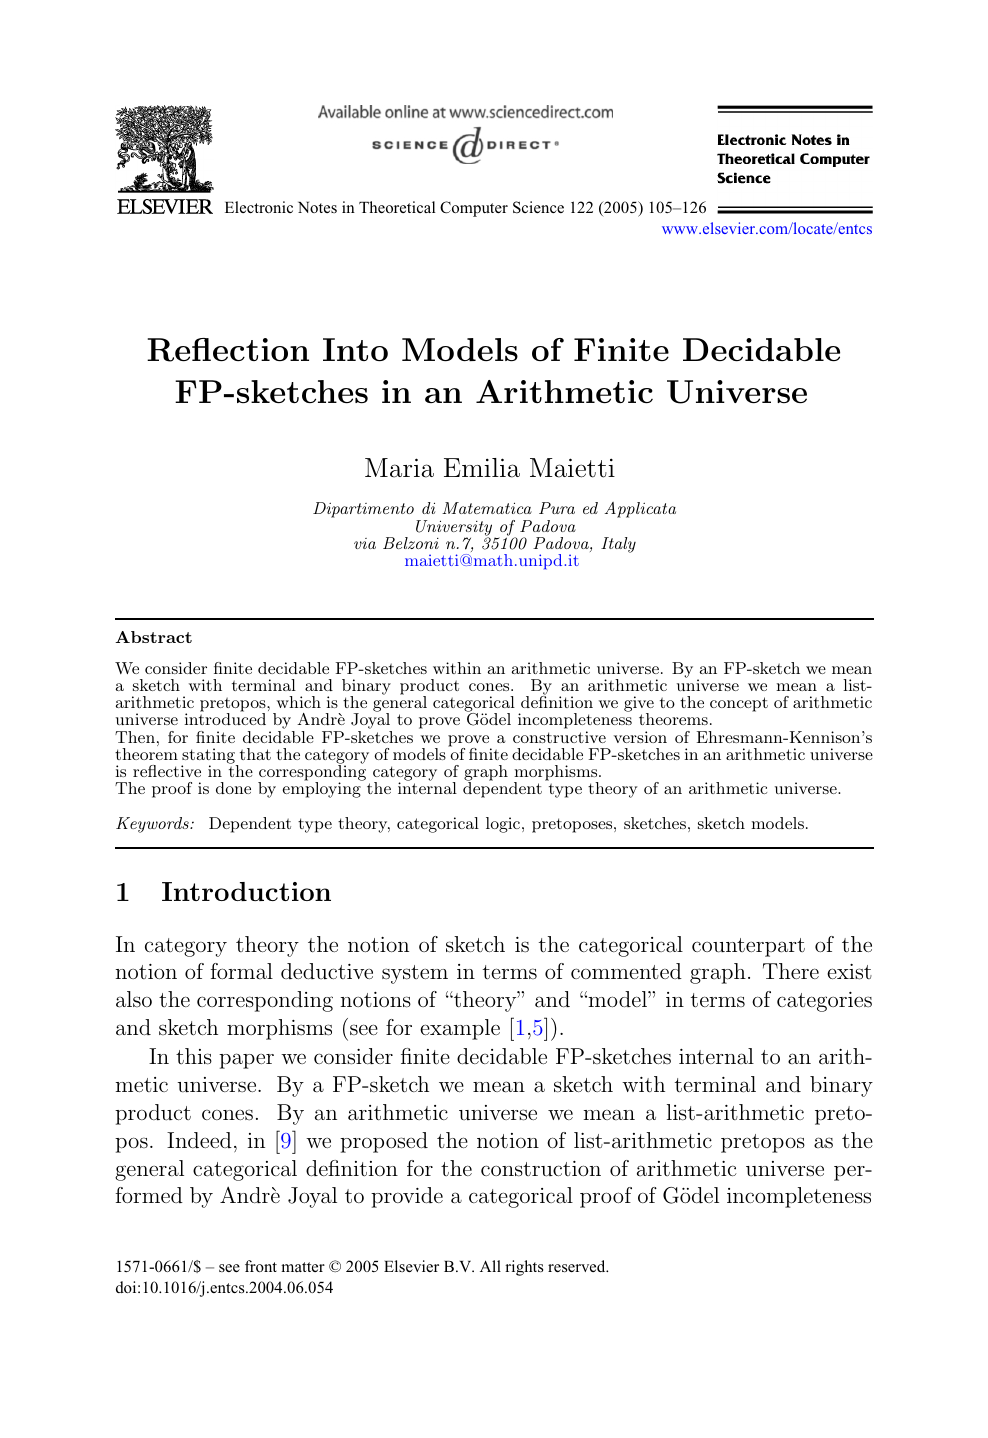 Reflection Into Models Of Finite Decidable Fp Sketches In An Arithmetic Universe Topic Of Research Paper In Computer And Information Sciences Download Scholarly Article Pdf And Read For Free On Cyberleninka Open